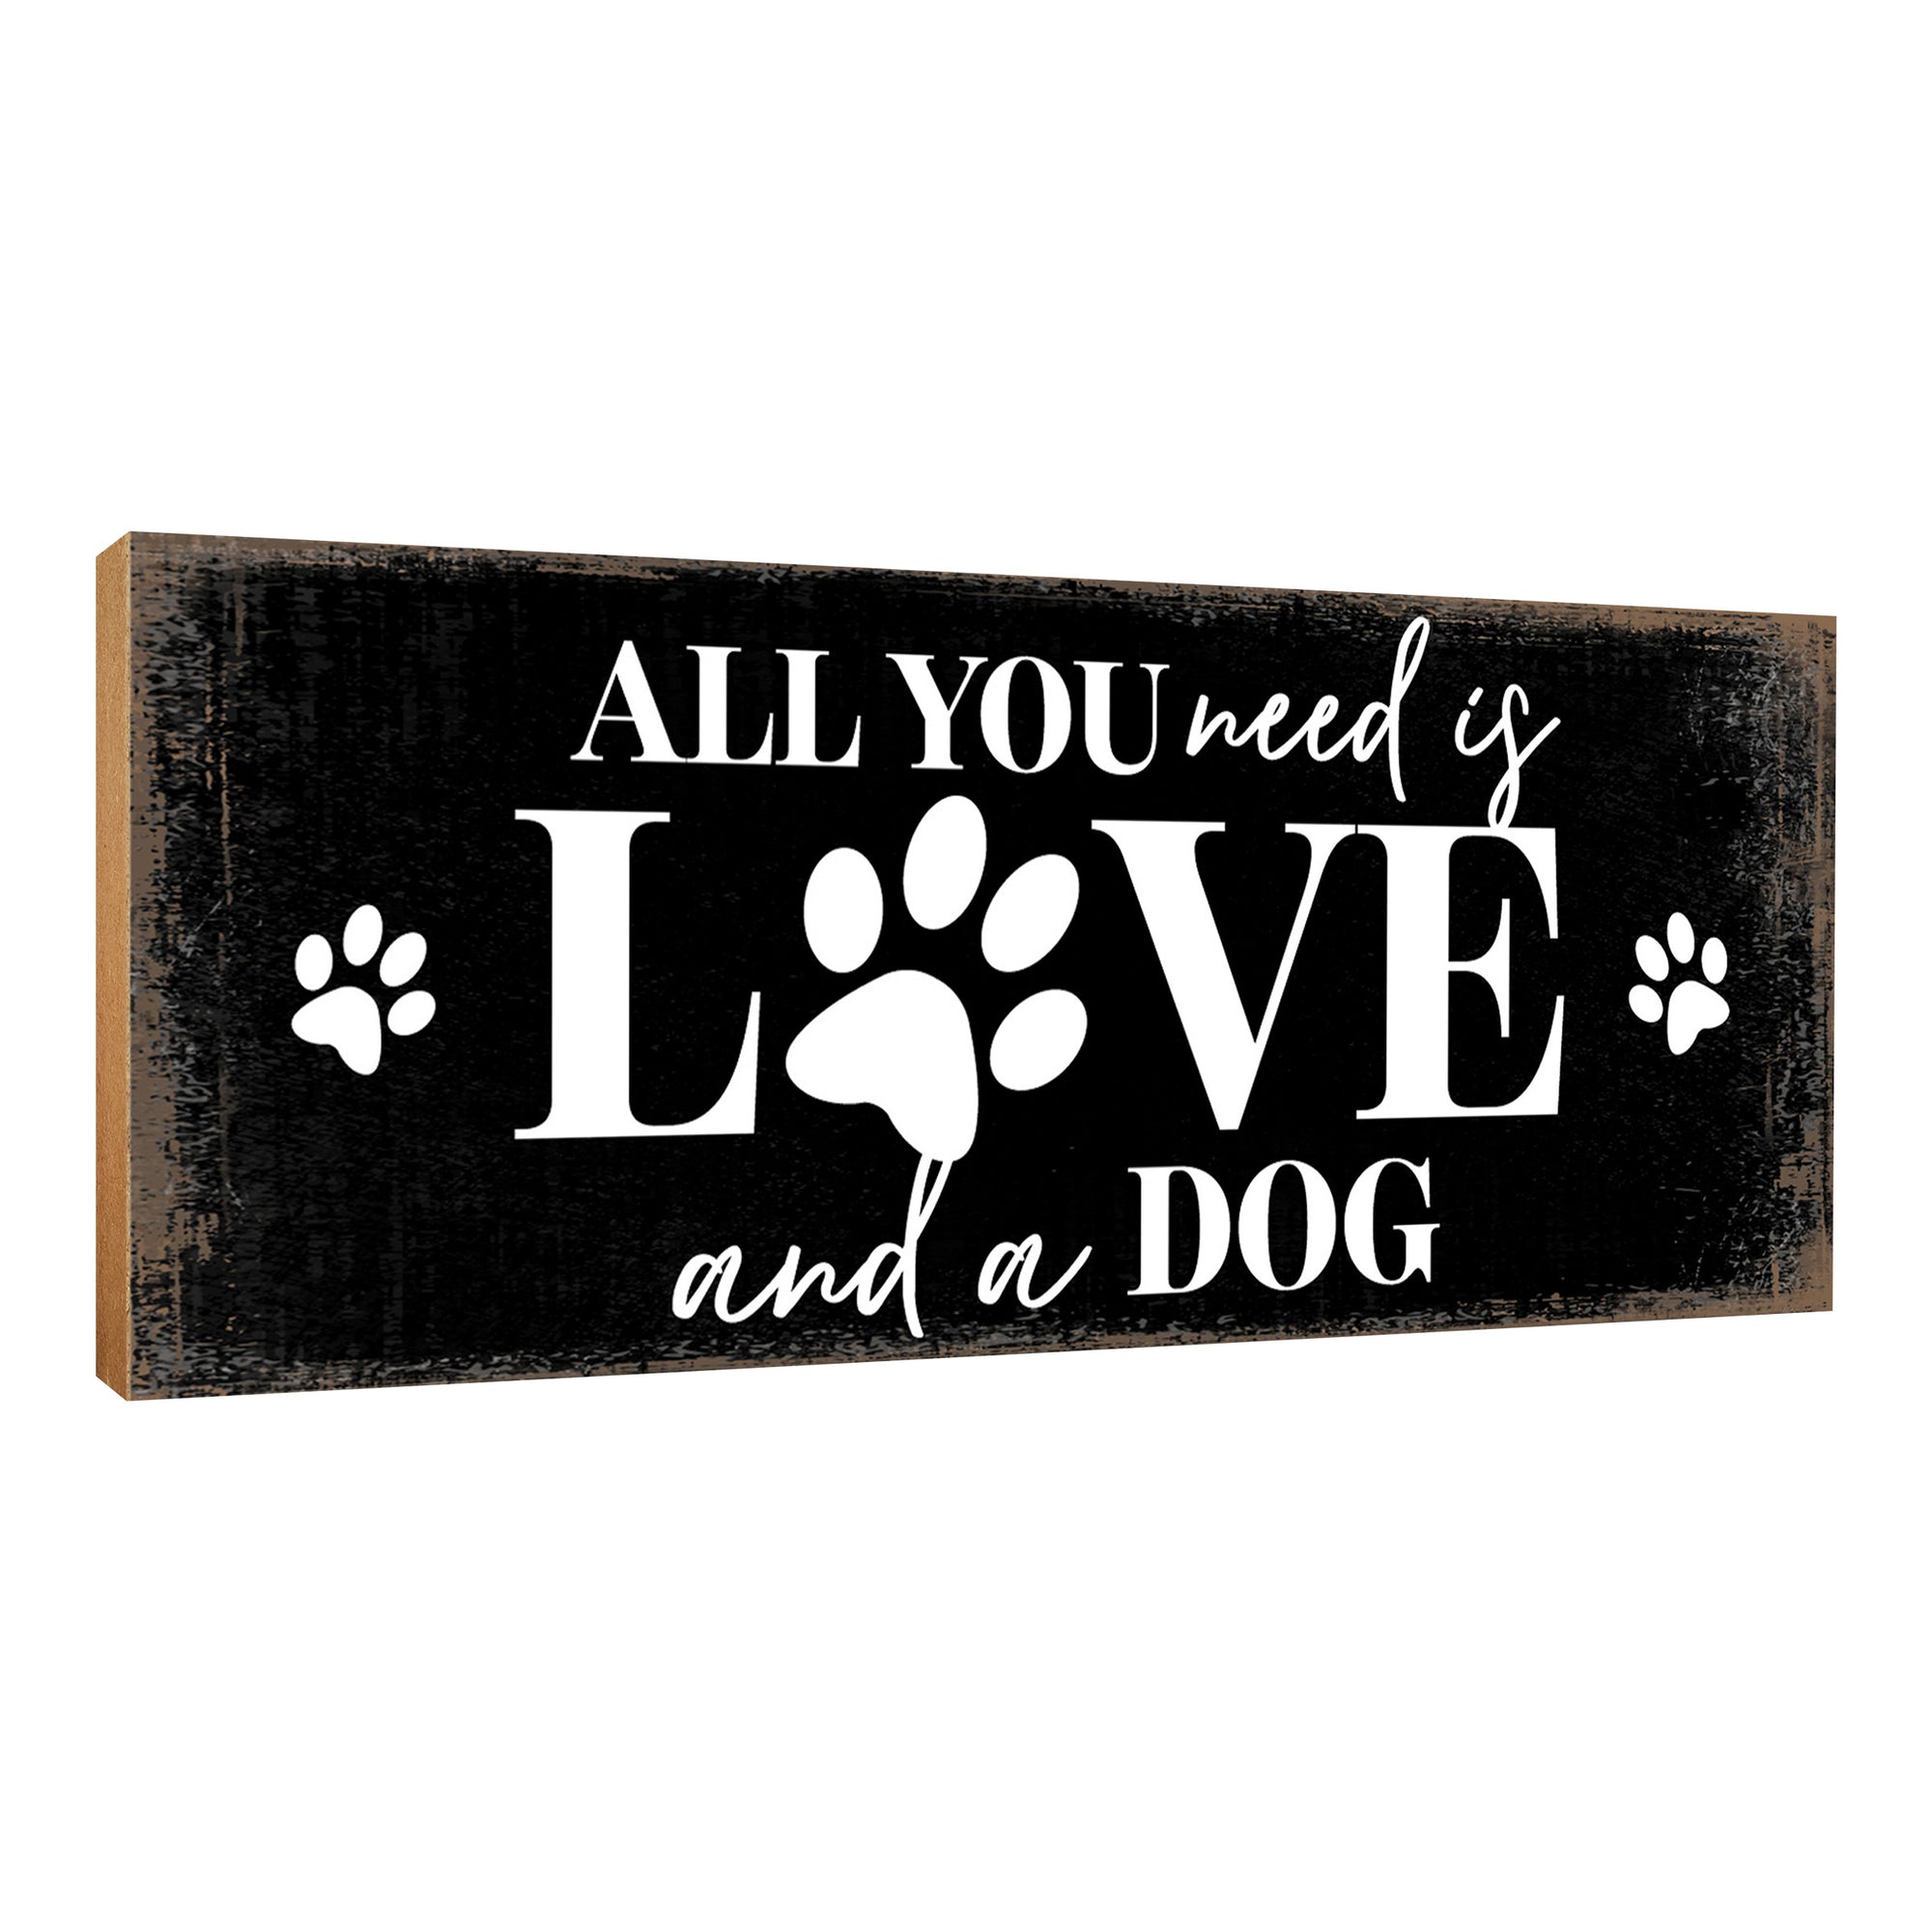 Wooden Shelf Decor and Tabletop Signs with Pet Verses - All You Need